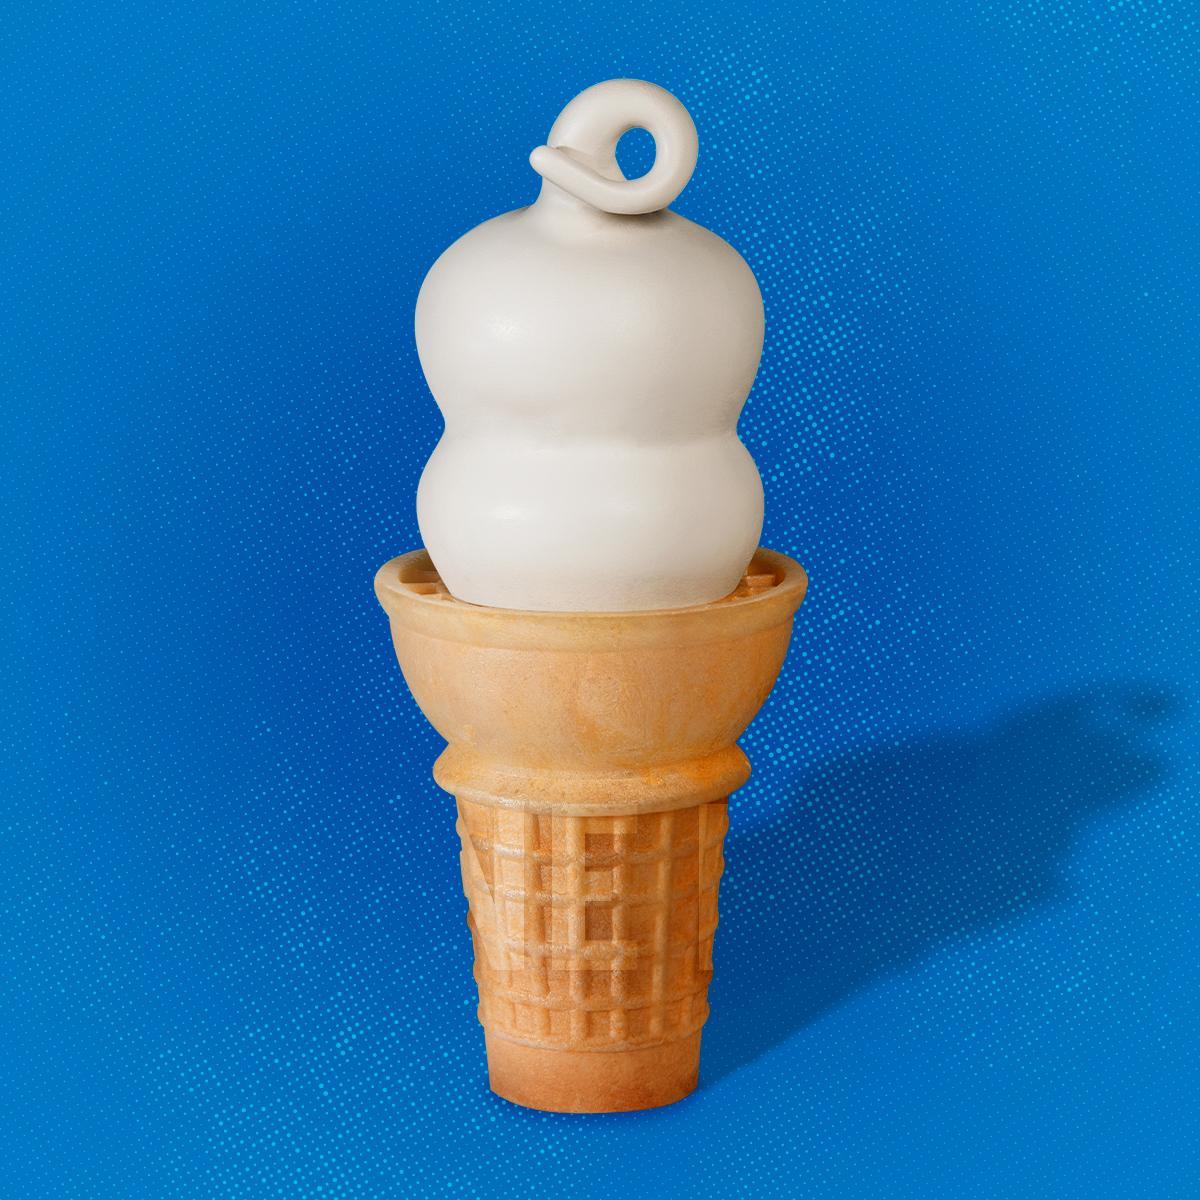 Dairy Queen celebrates the first day of spring with free cones San